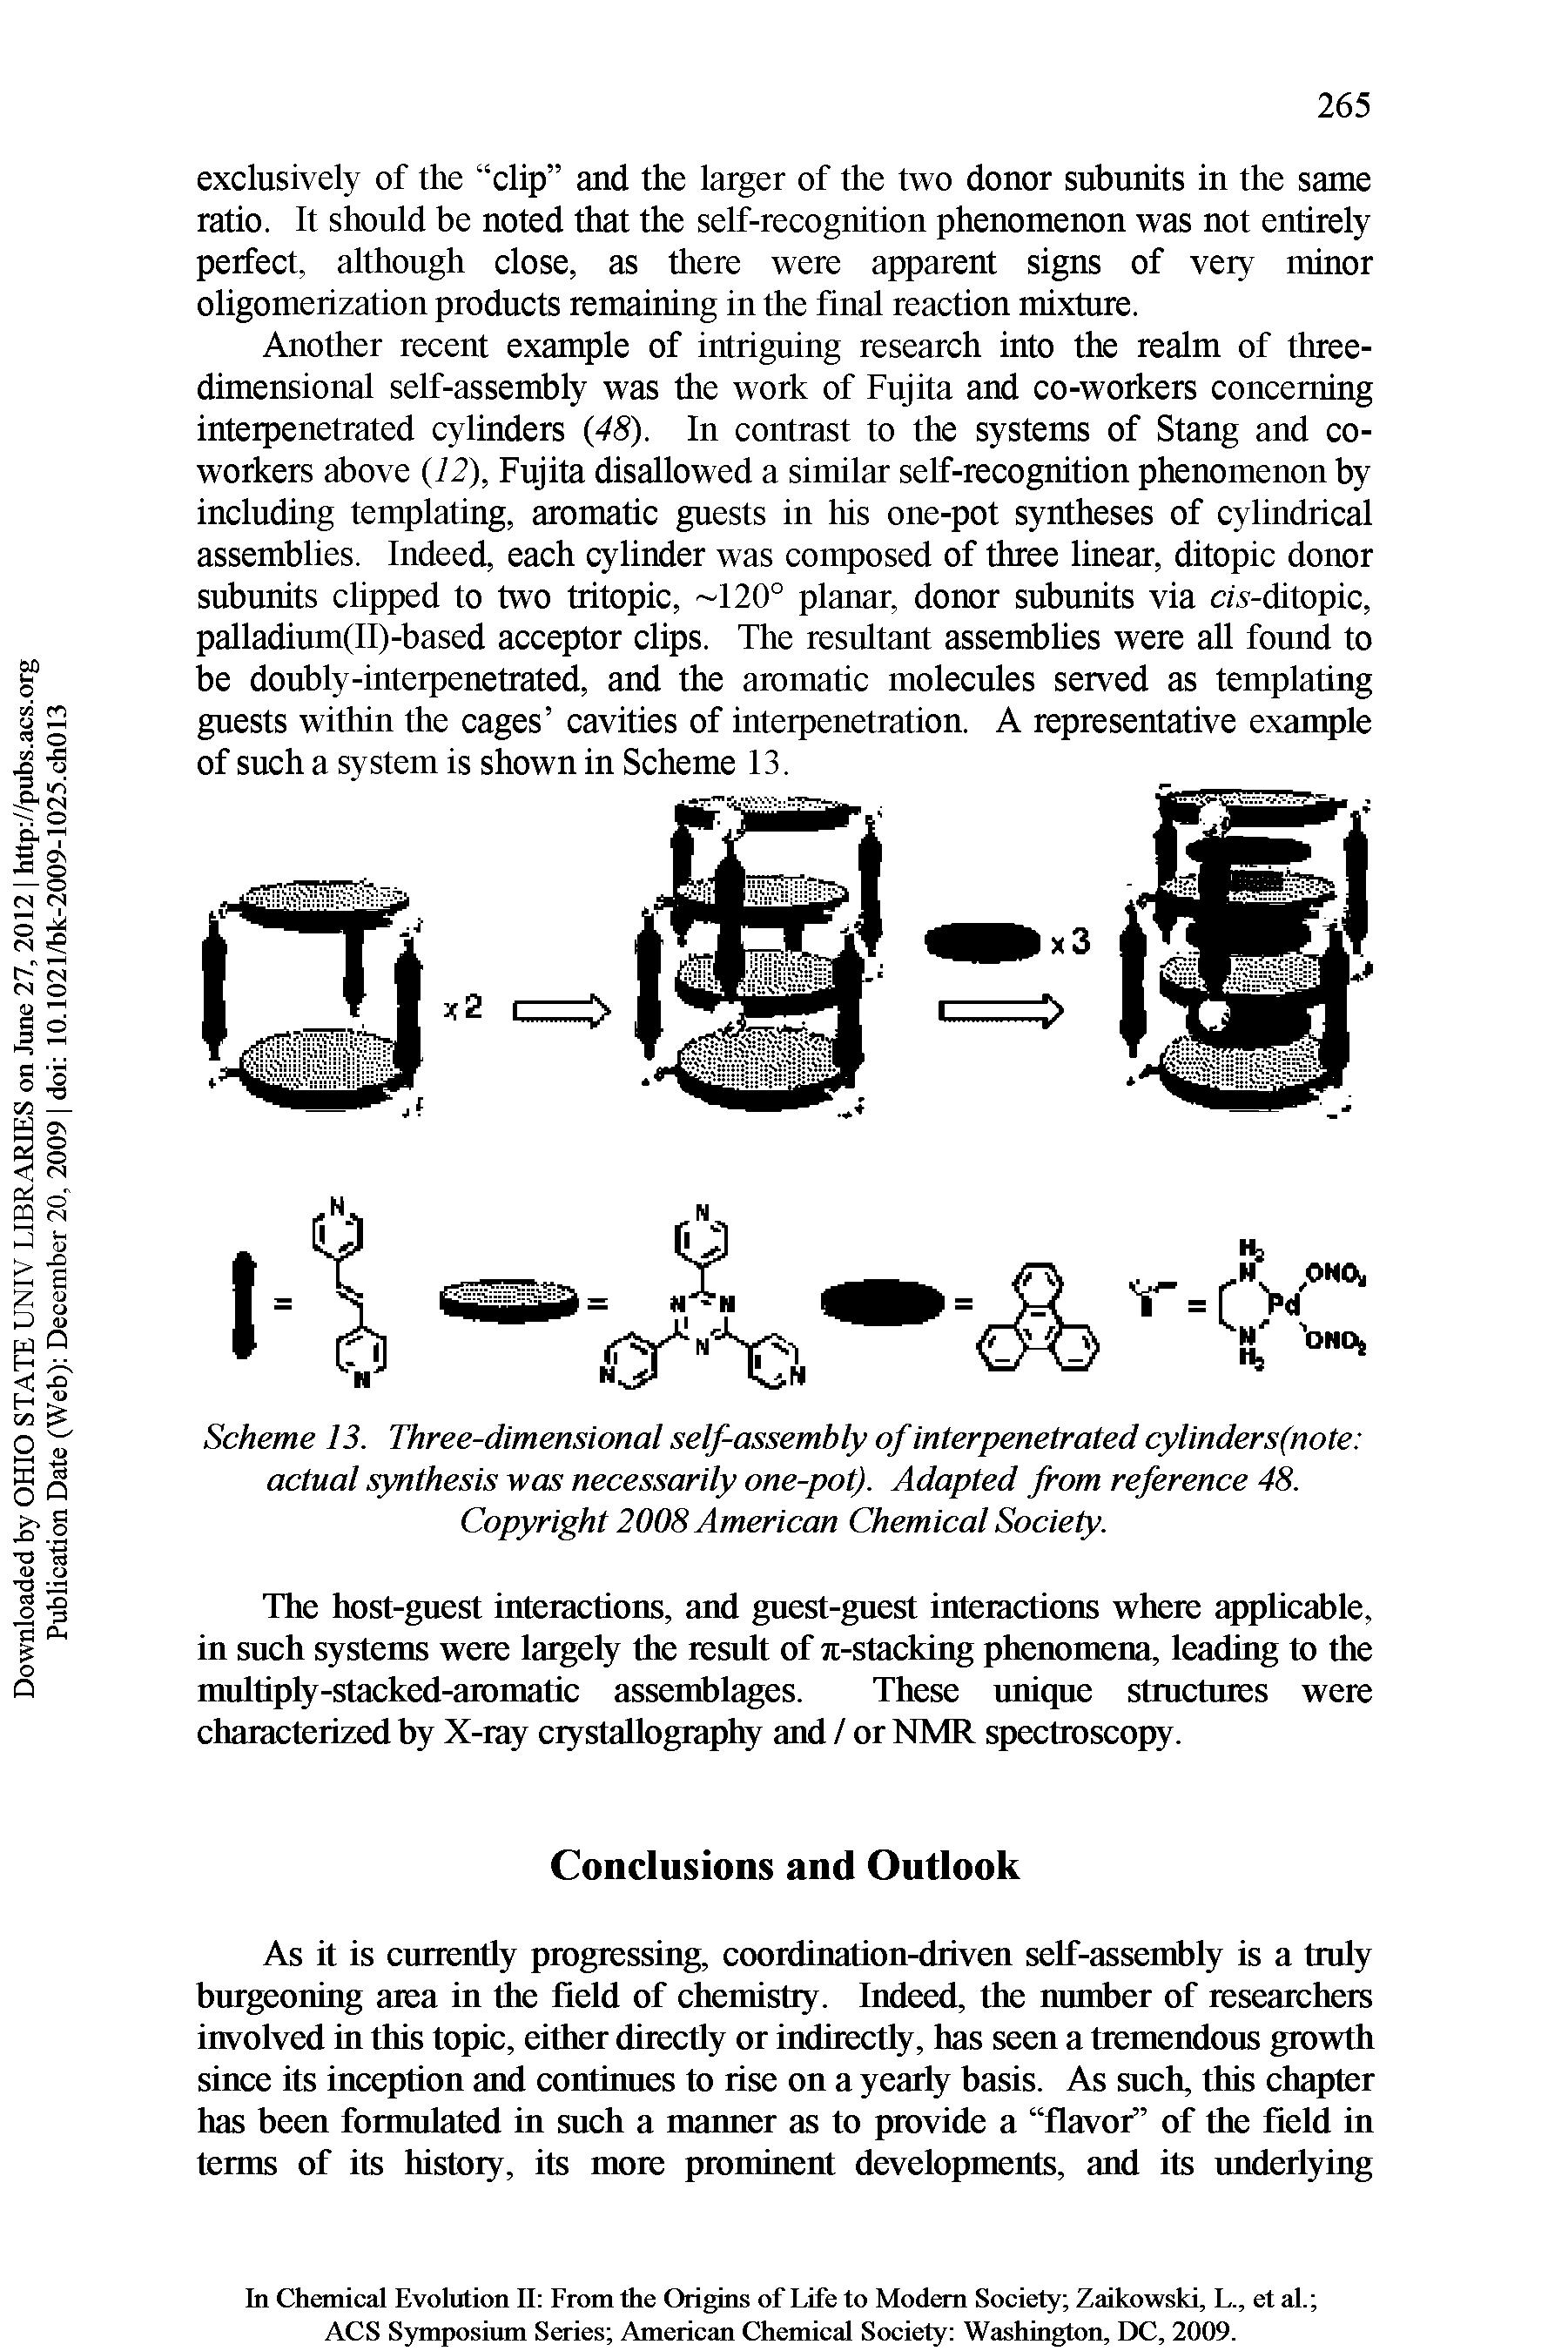 Scheme 13. Three-dimensional self-assembly of interpenetrated cylinders(note actual synthesis was necessarily one-pot). Adapted from reference 48.